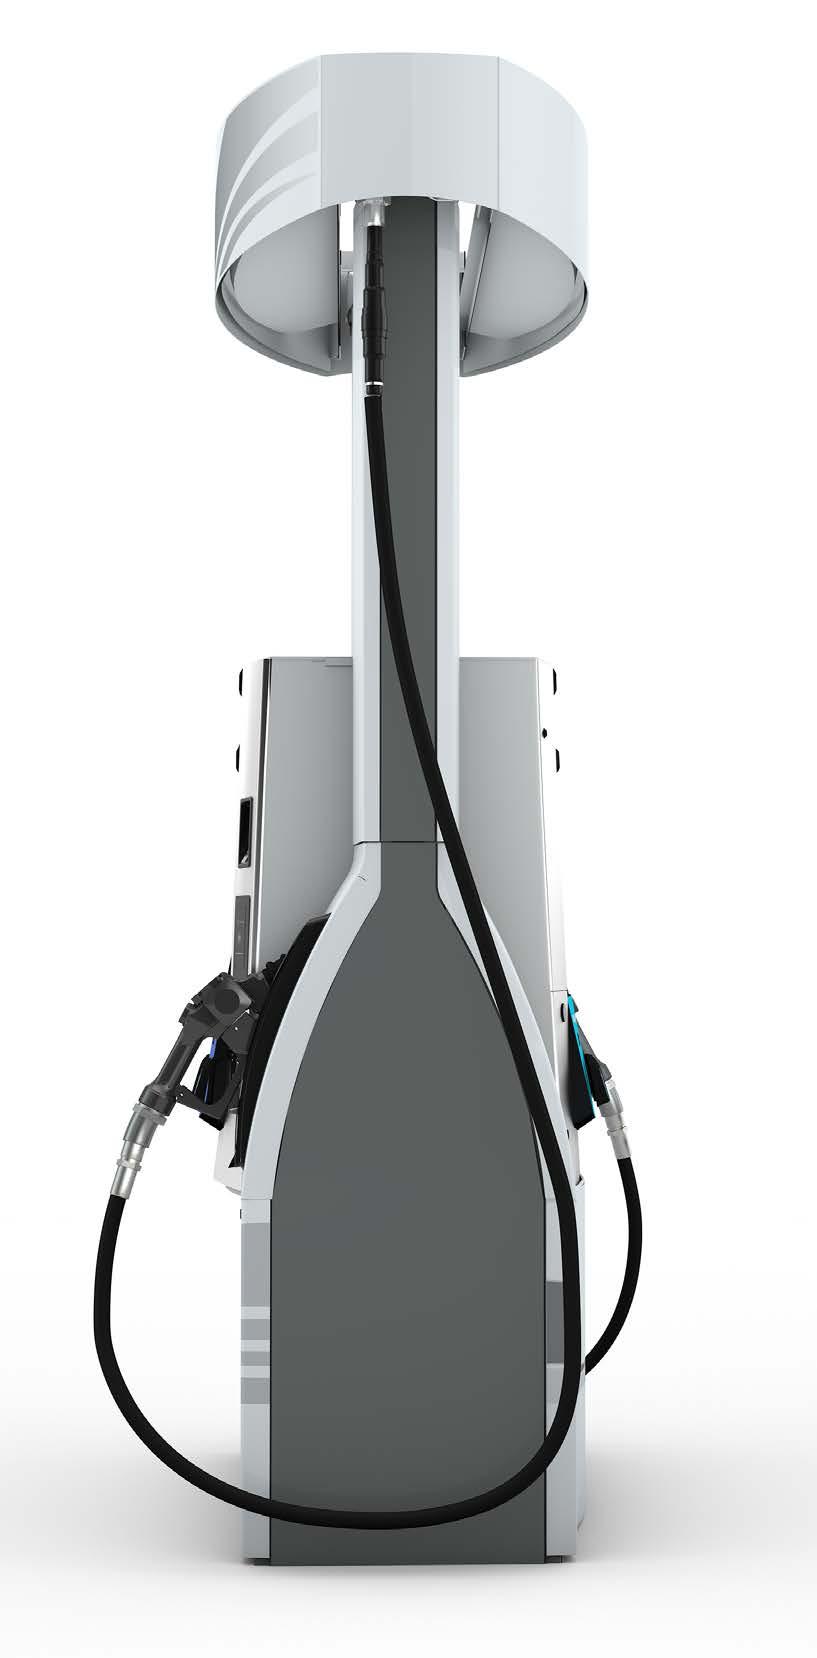 Freedom to choose. Whatever the forecourt need - the Ovation fuel dispenser will fit.